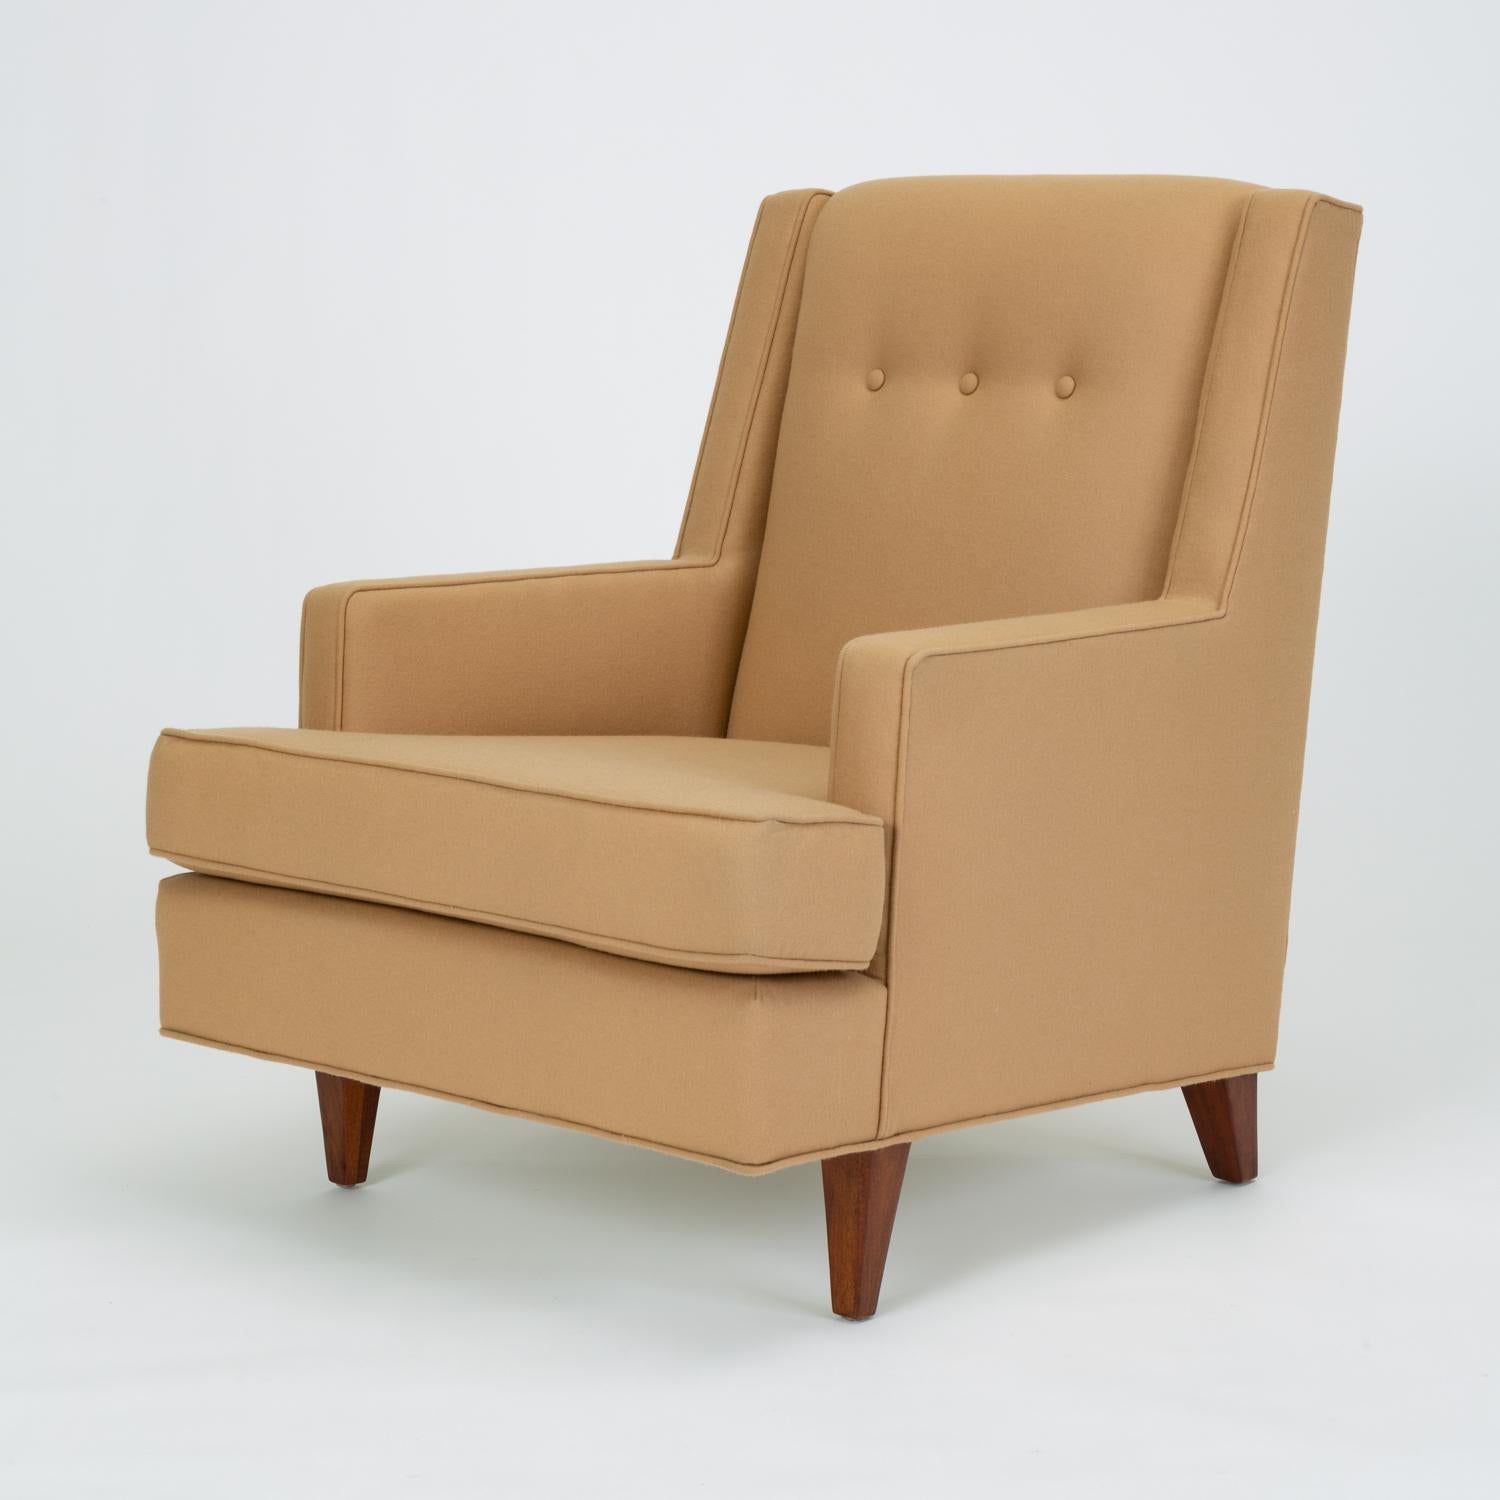 A “Mr.” chair from one of Edward Wormley his-and-hers chair pairings for Dunbar, this example has in soft brown wool felt has a high back, sloped sides and arms, and sits on four thick legs that taper slightly to the floor. A single row of tufting